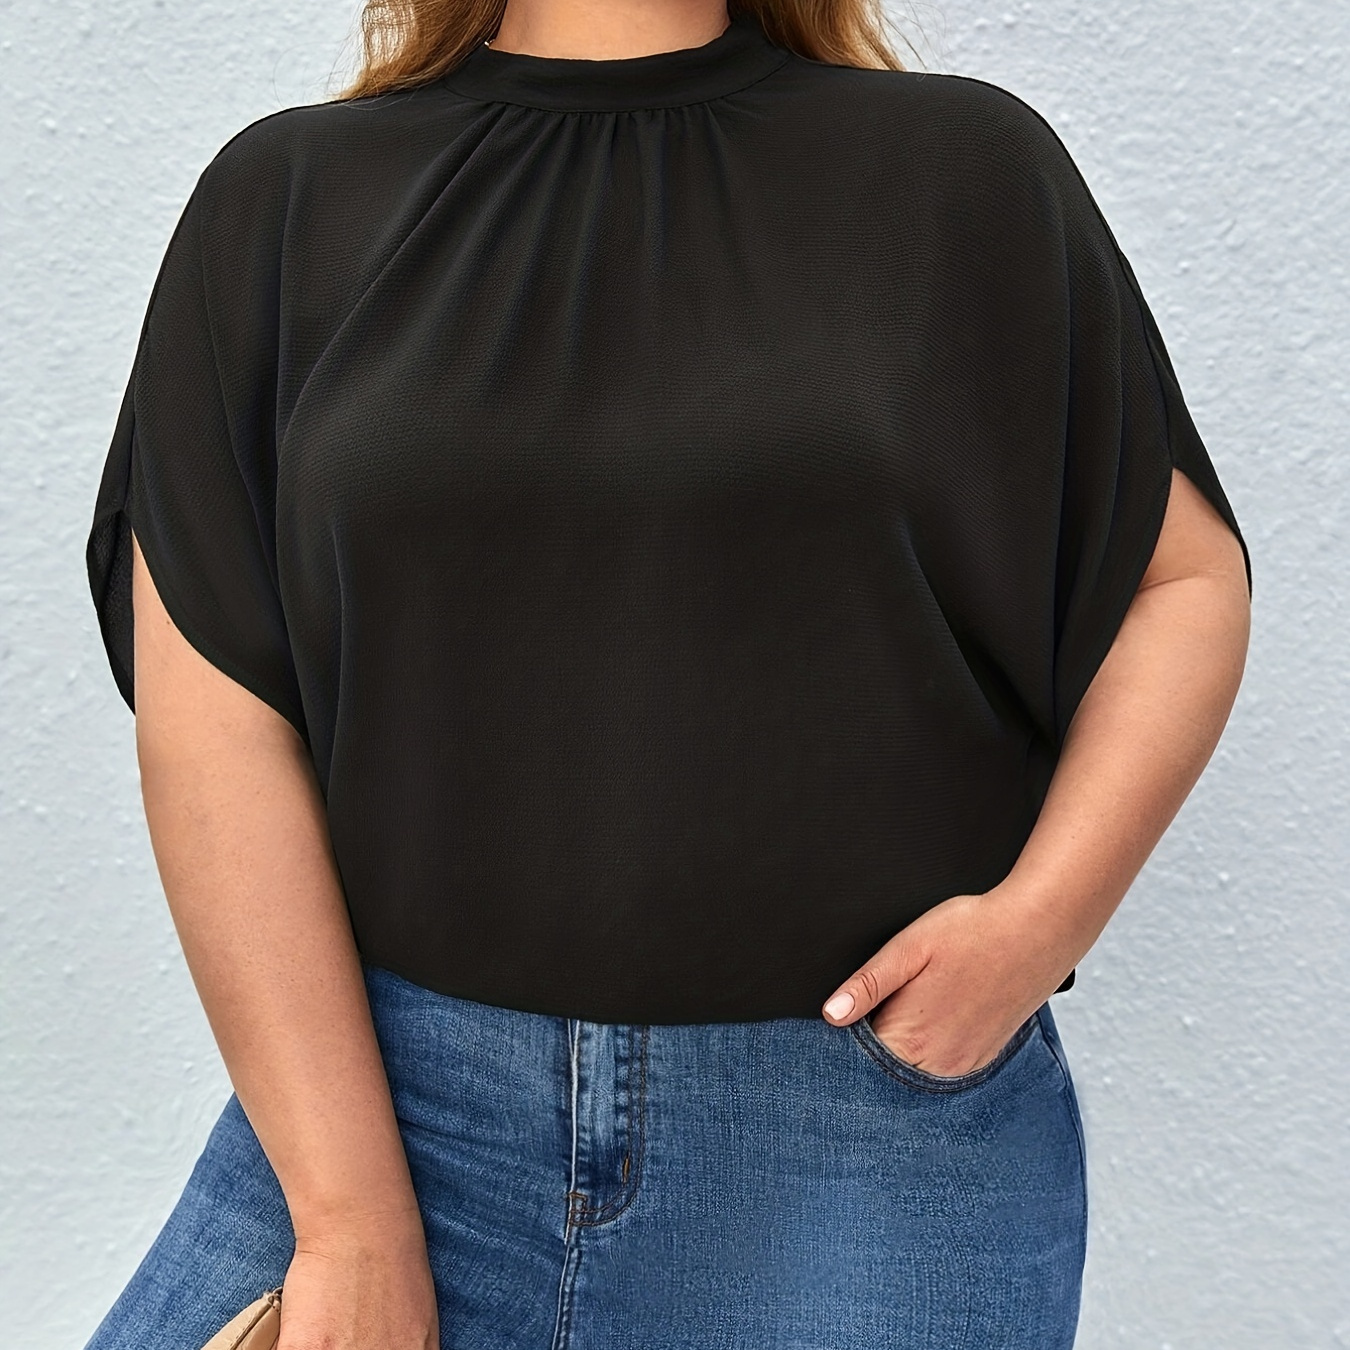 

Plus Size Casual T-shirt, Women's Plus Solid Batwing Sleeve Round Neck Cut Out Tie Back Loose Fit T-shirt